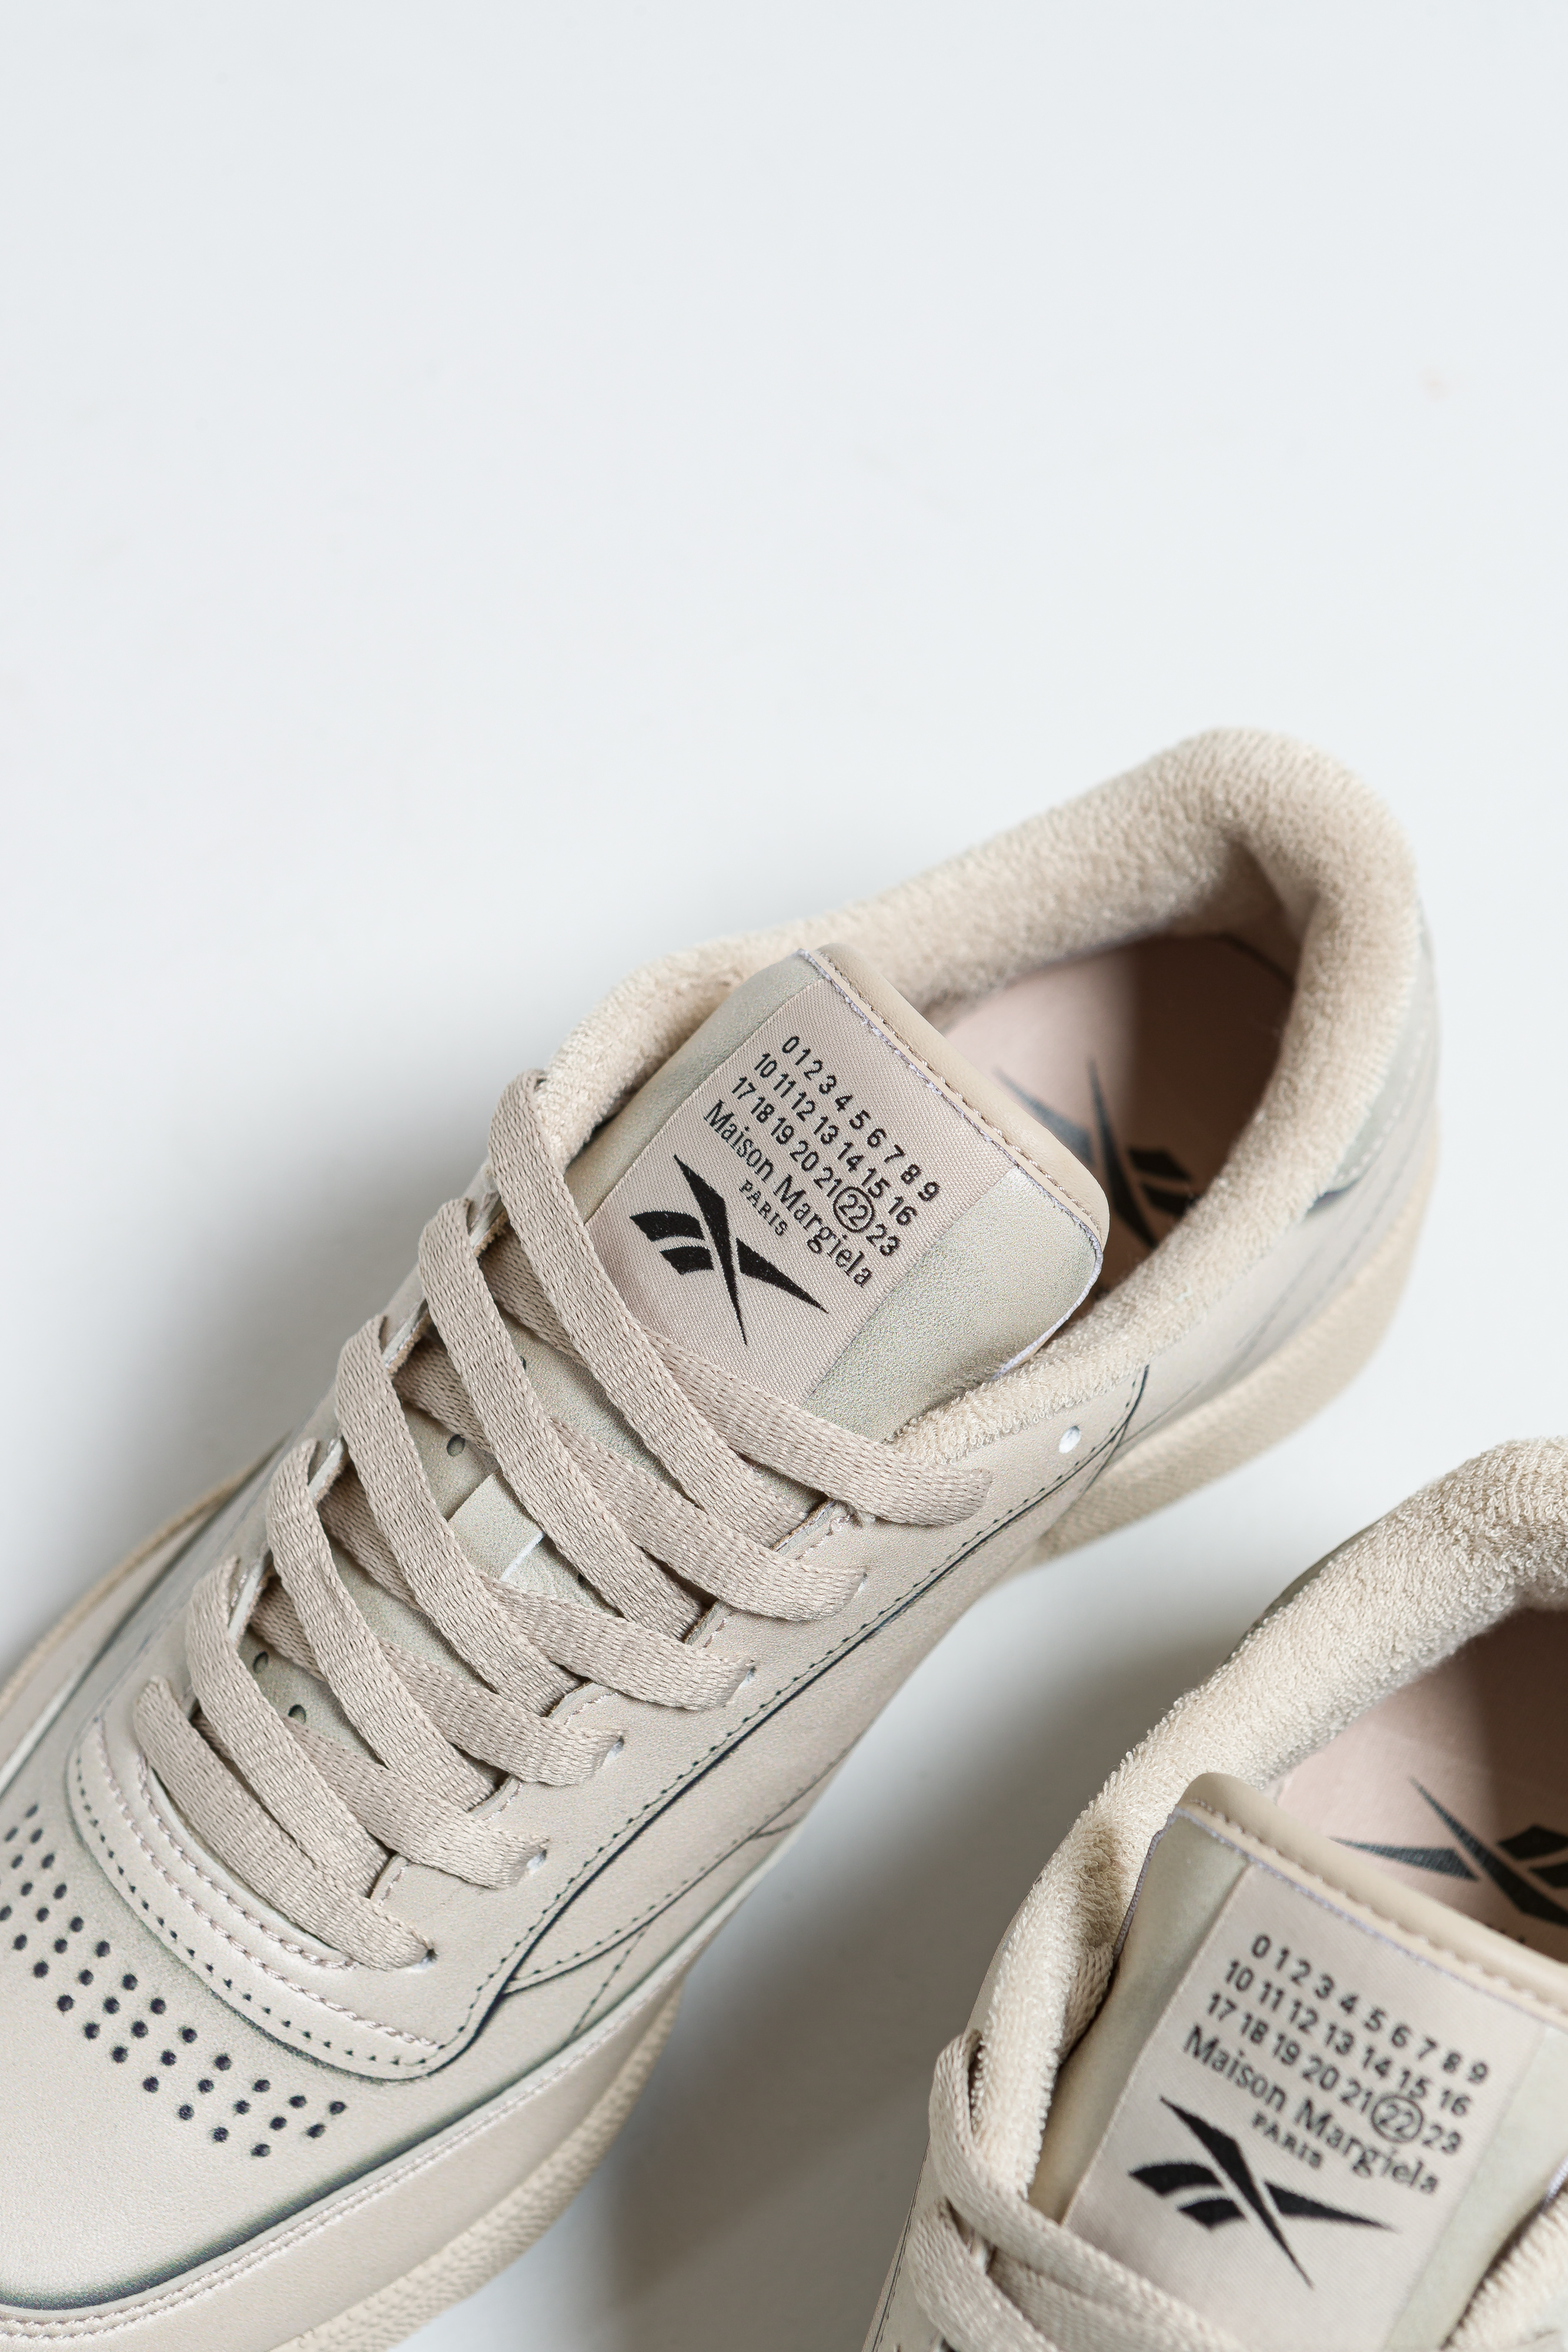 Up There Store - Reebok Classics X Maison Martin Margiela Project 0 Club C 'Natural'